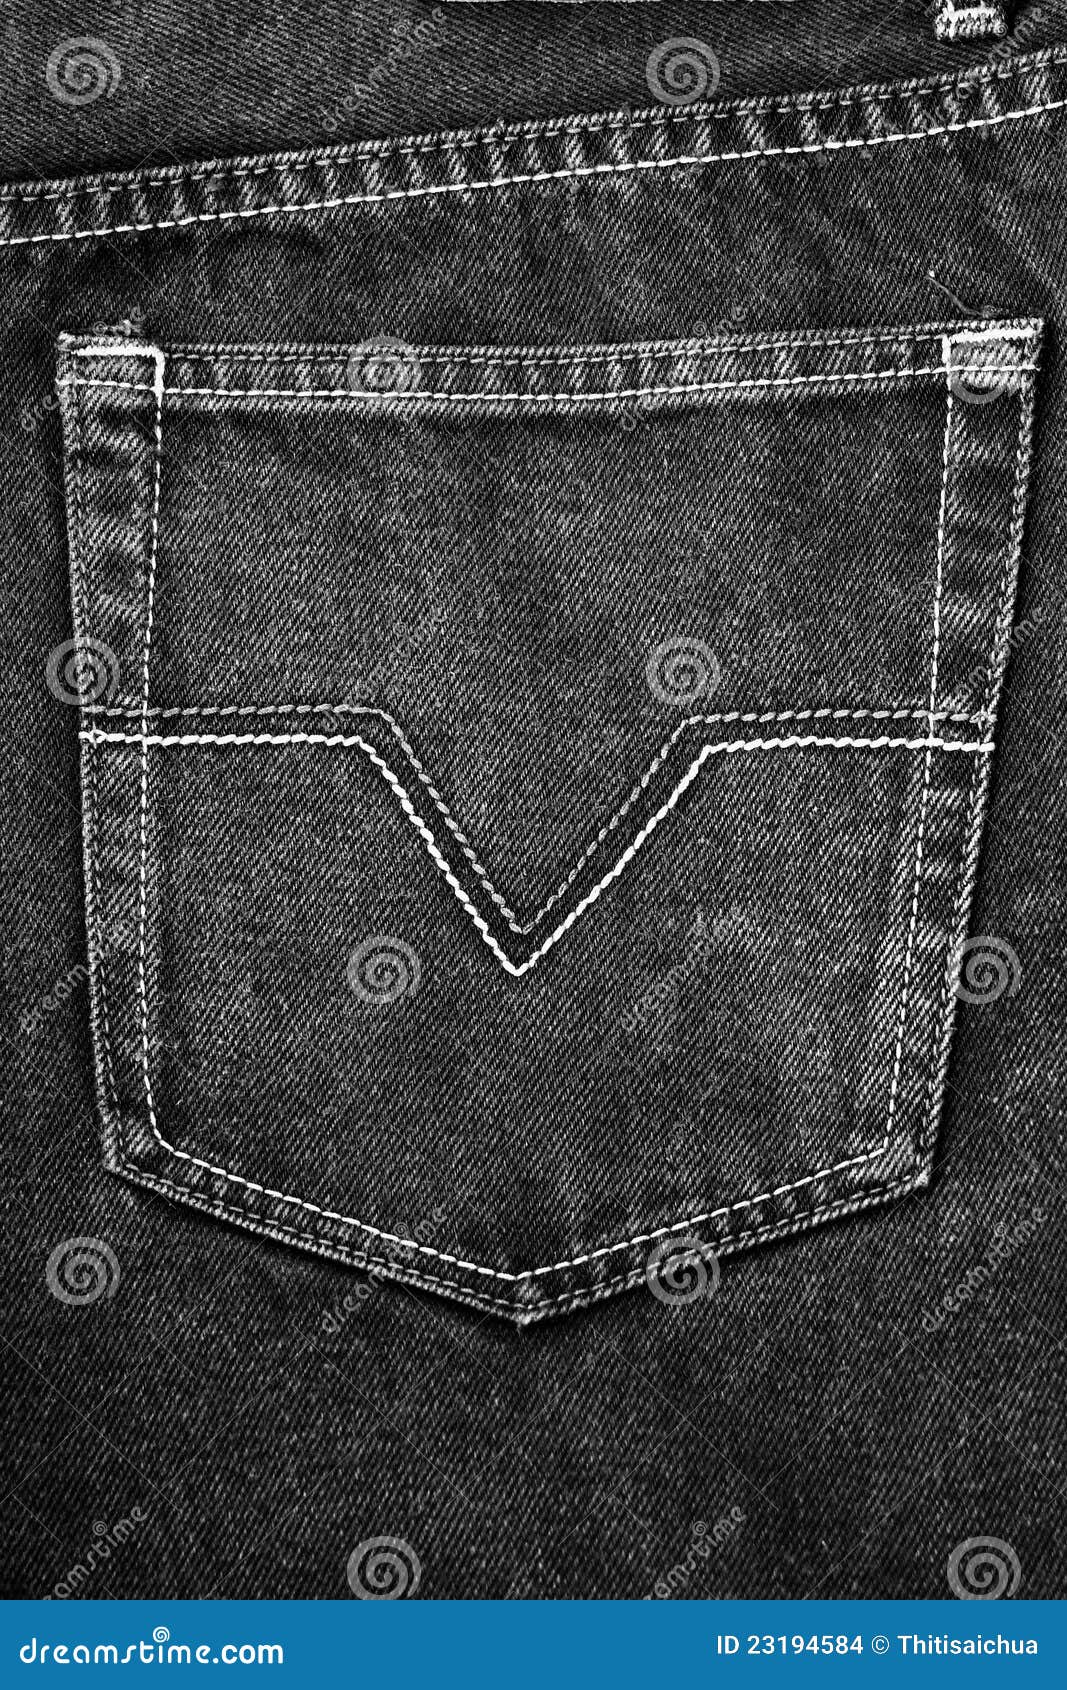 Black fabric jean pocket stock photo. Image of material - 23194584